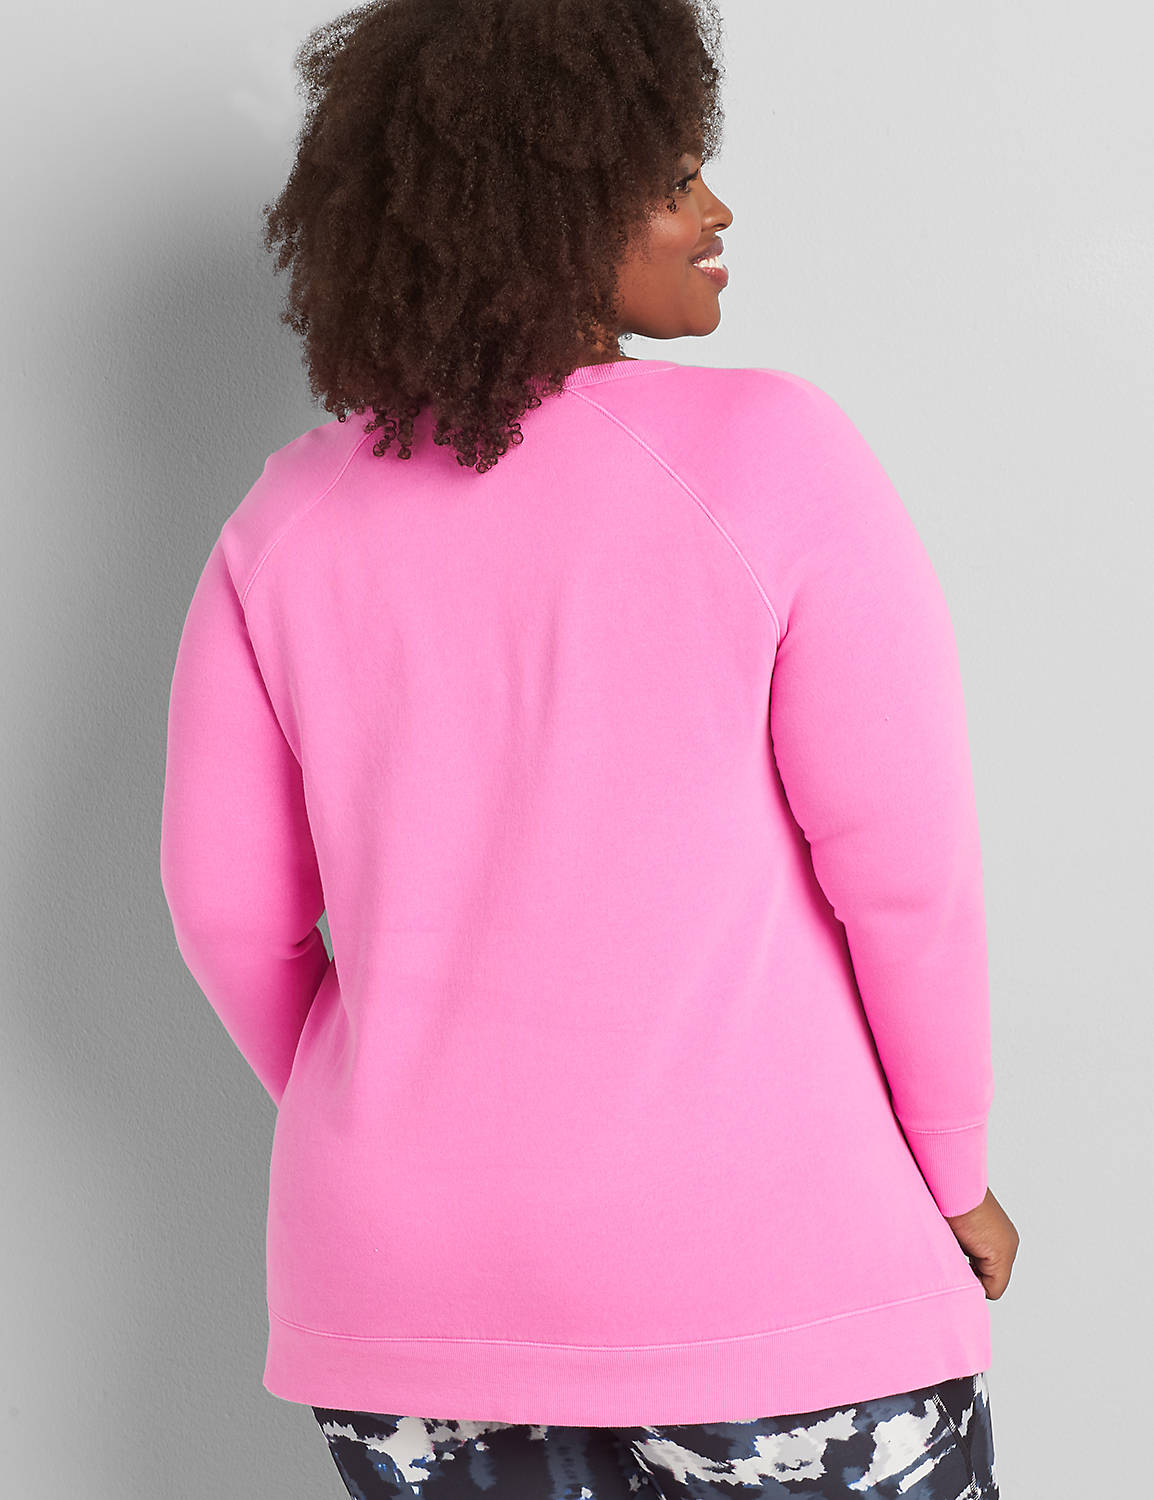 Long Sleeve Crew Neck Zipper Detail French Terry Tunic S 1116883:Bold Pink 62-0005-15:14/16 Product Image 2